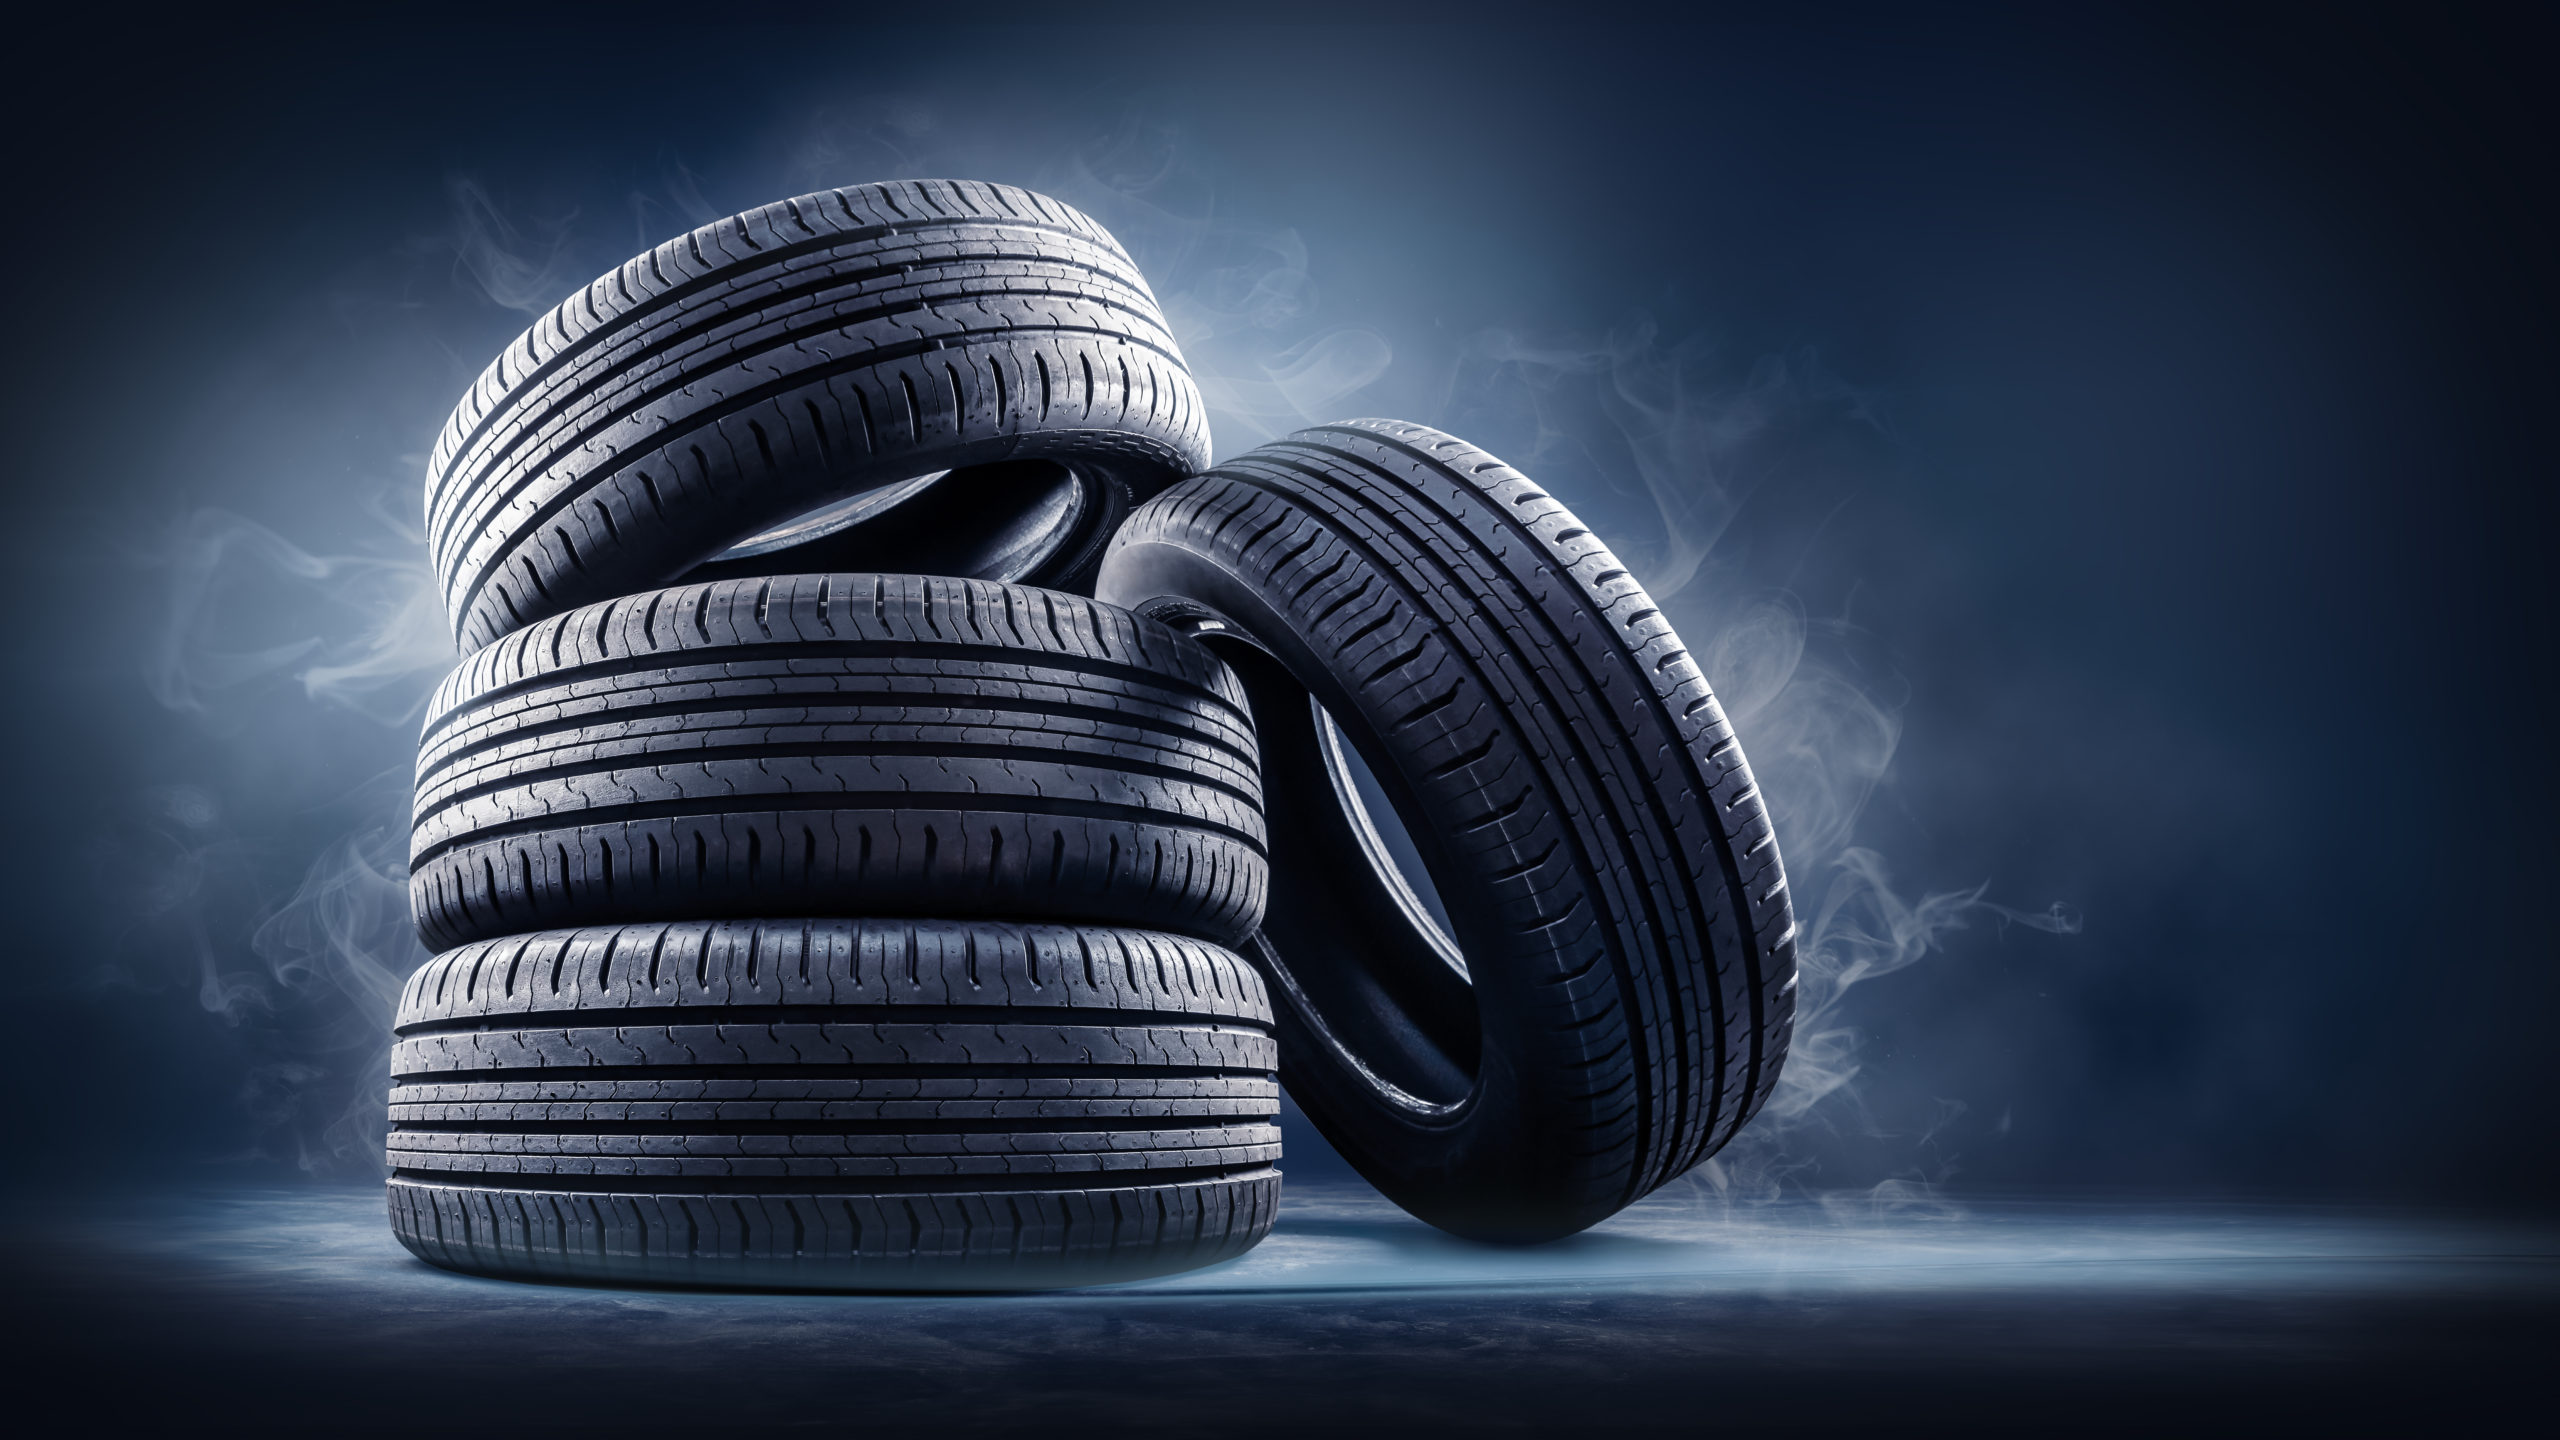 Which Tyres Should Be Fitted To Protect Alloy Wheels? - etyres blog